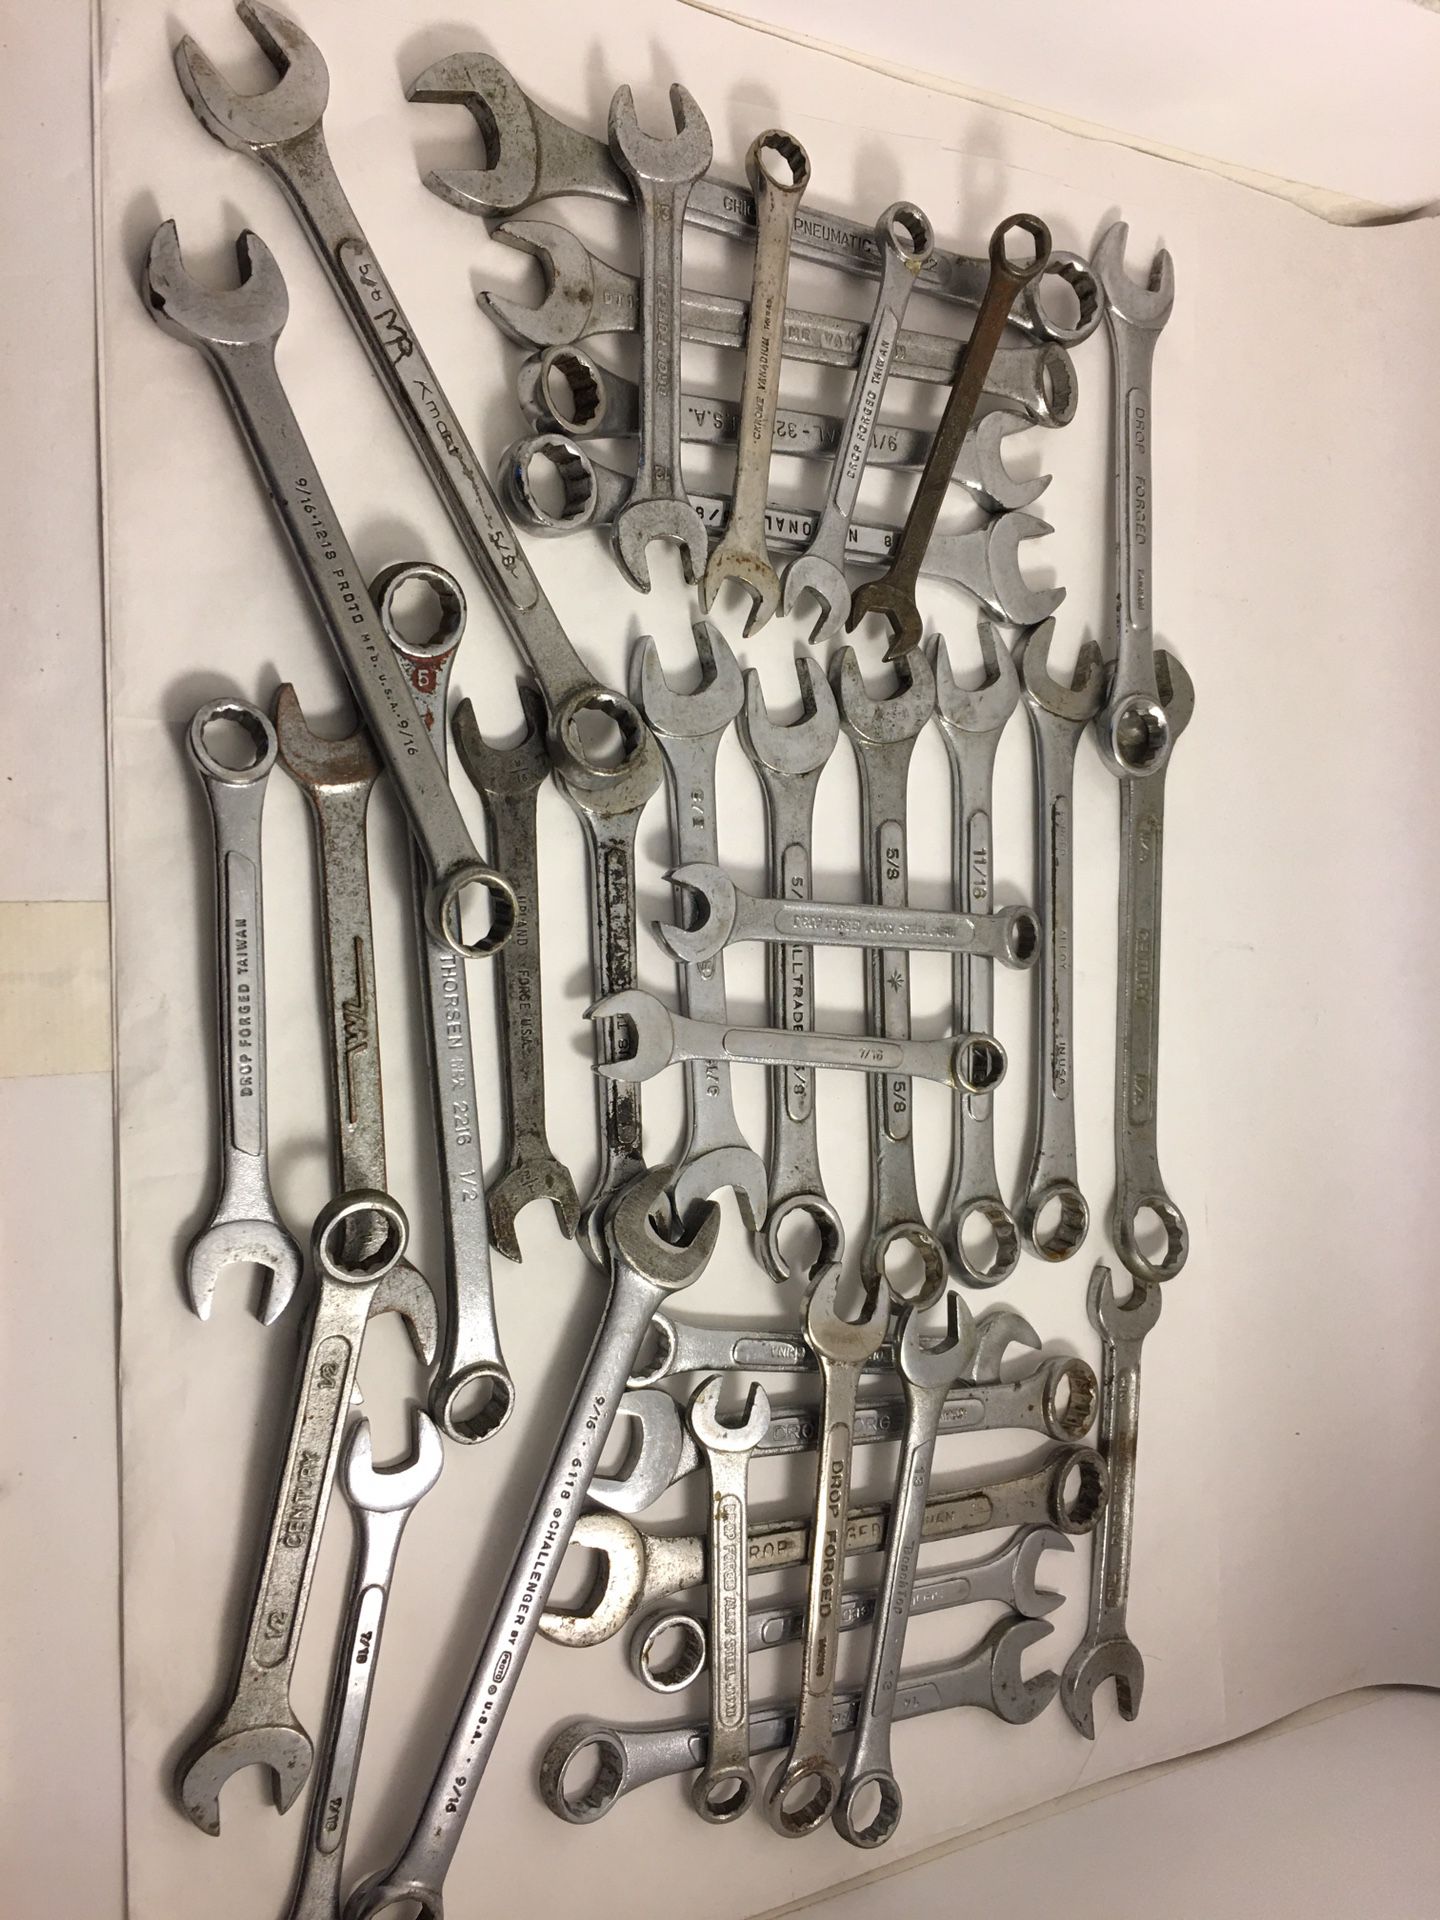 Lot of Mixt wrenches mechanics tools woodworking